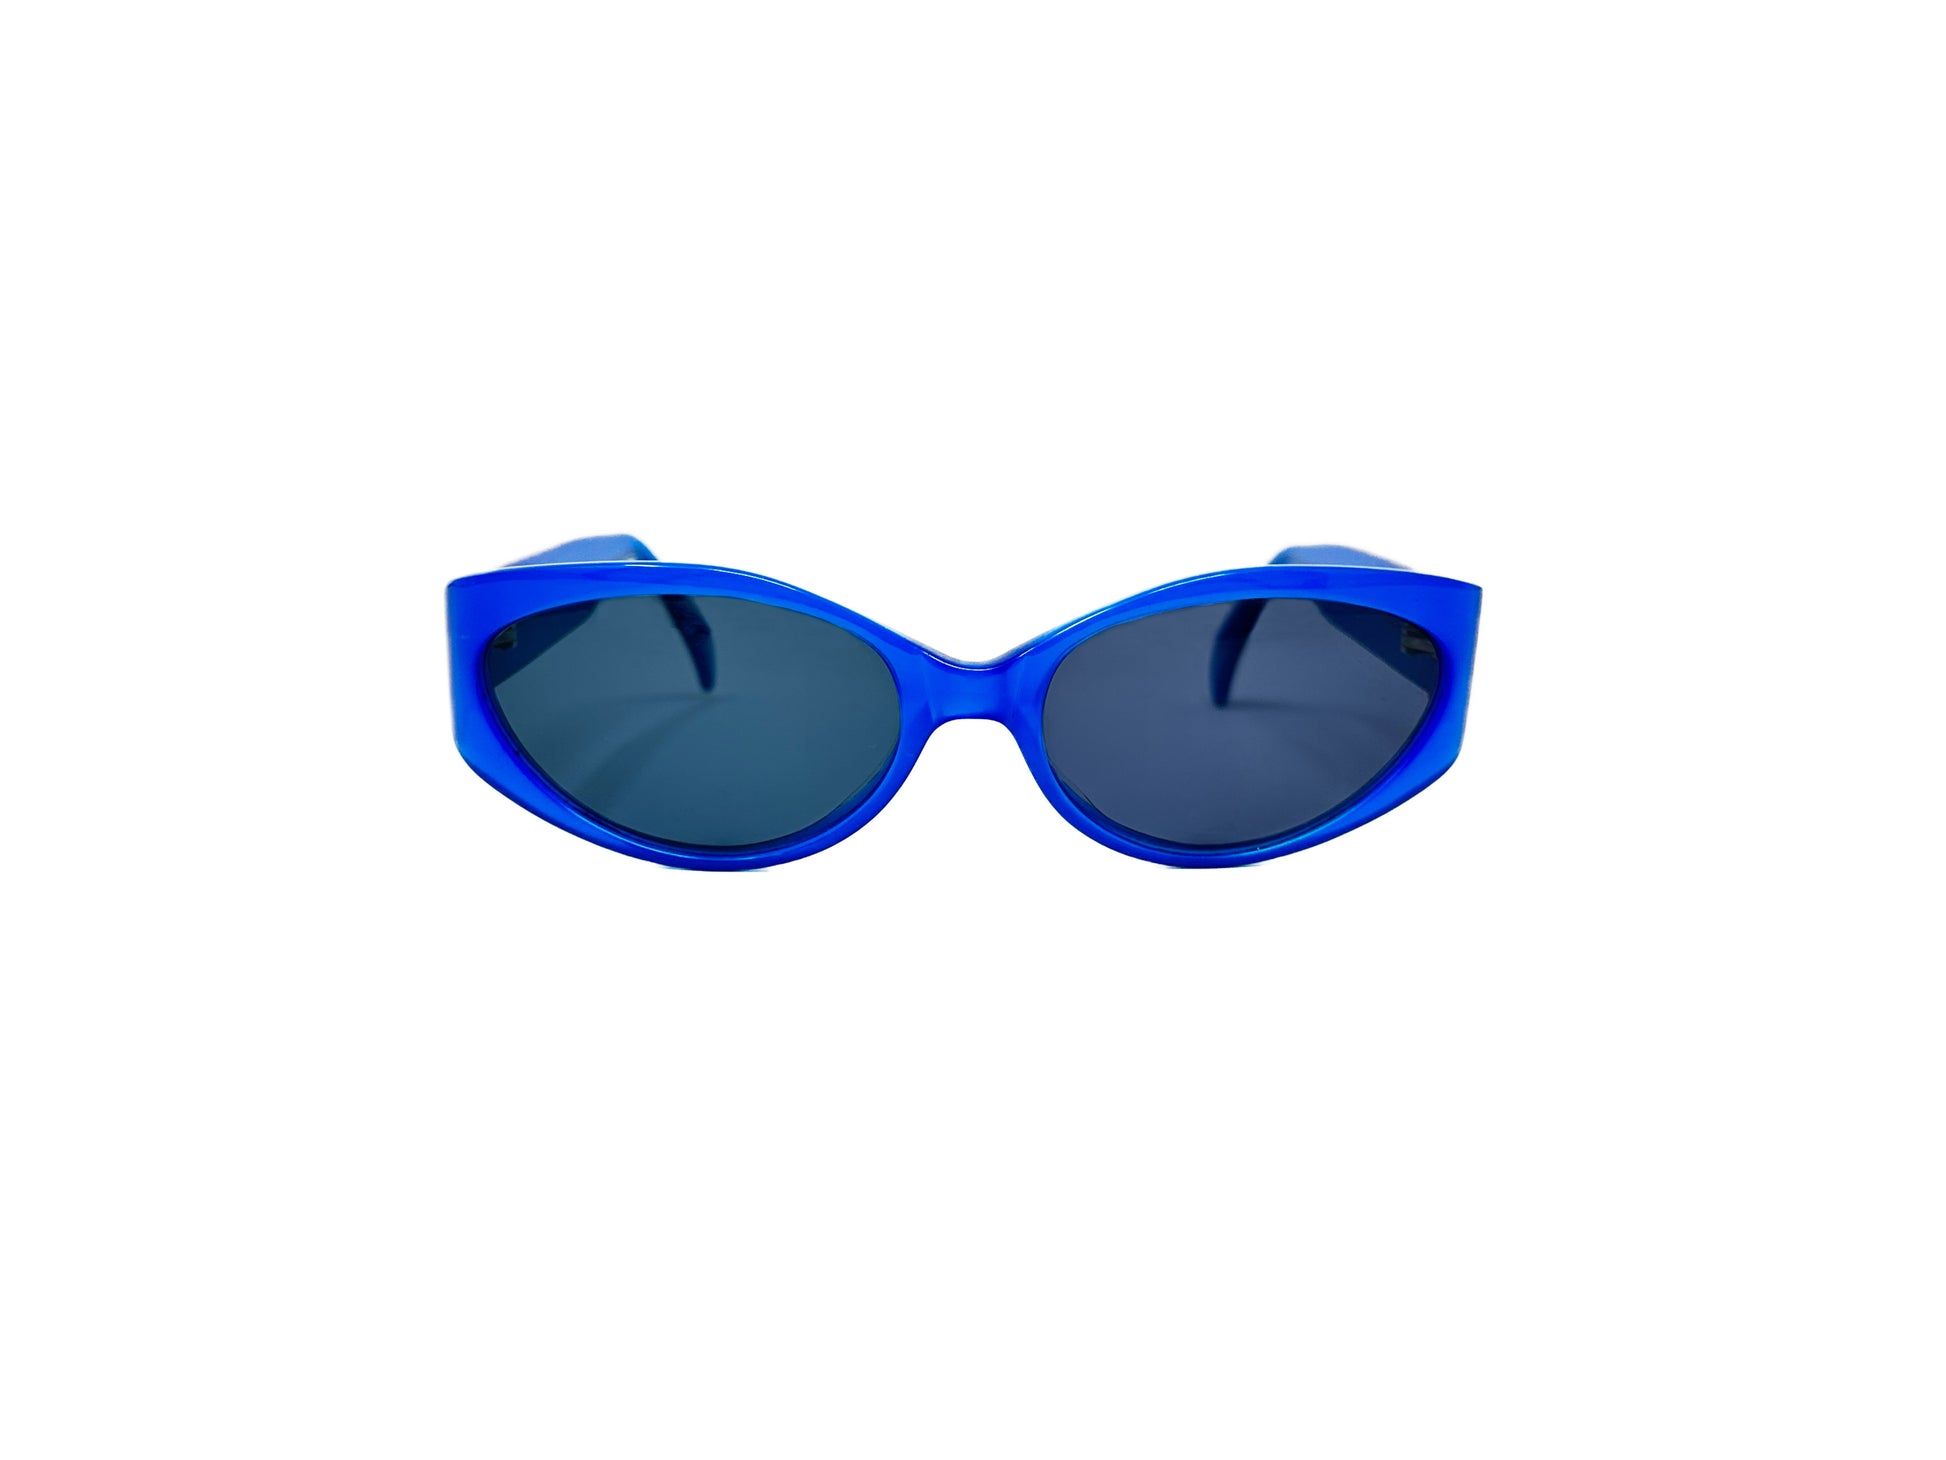 Nicole Miller acetate sunglass. Model: 1326 Angels. Color: Blue Frost 1464. Front view. 